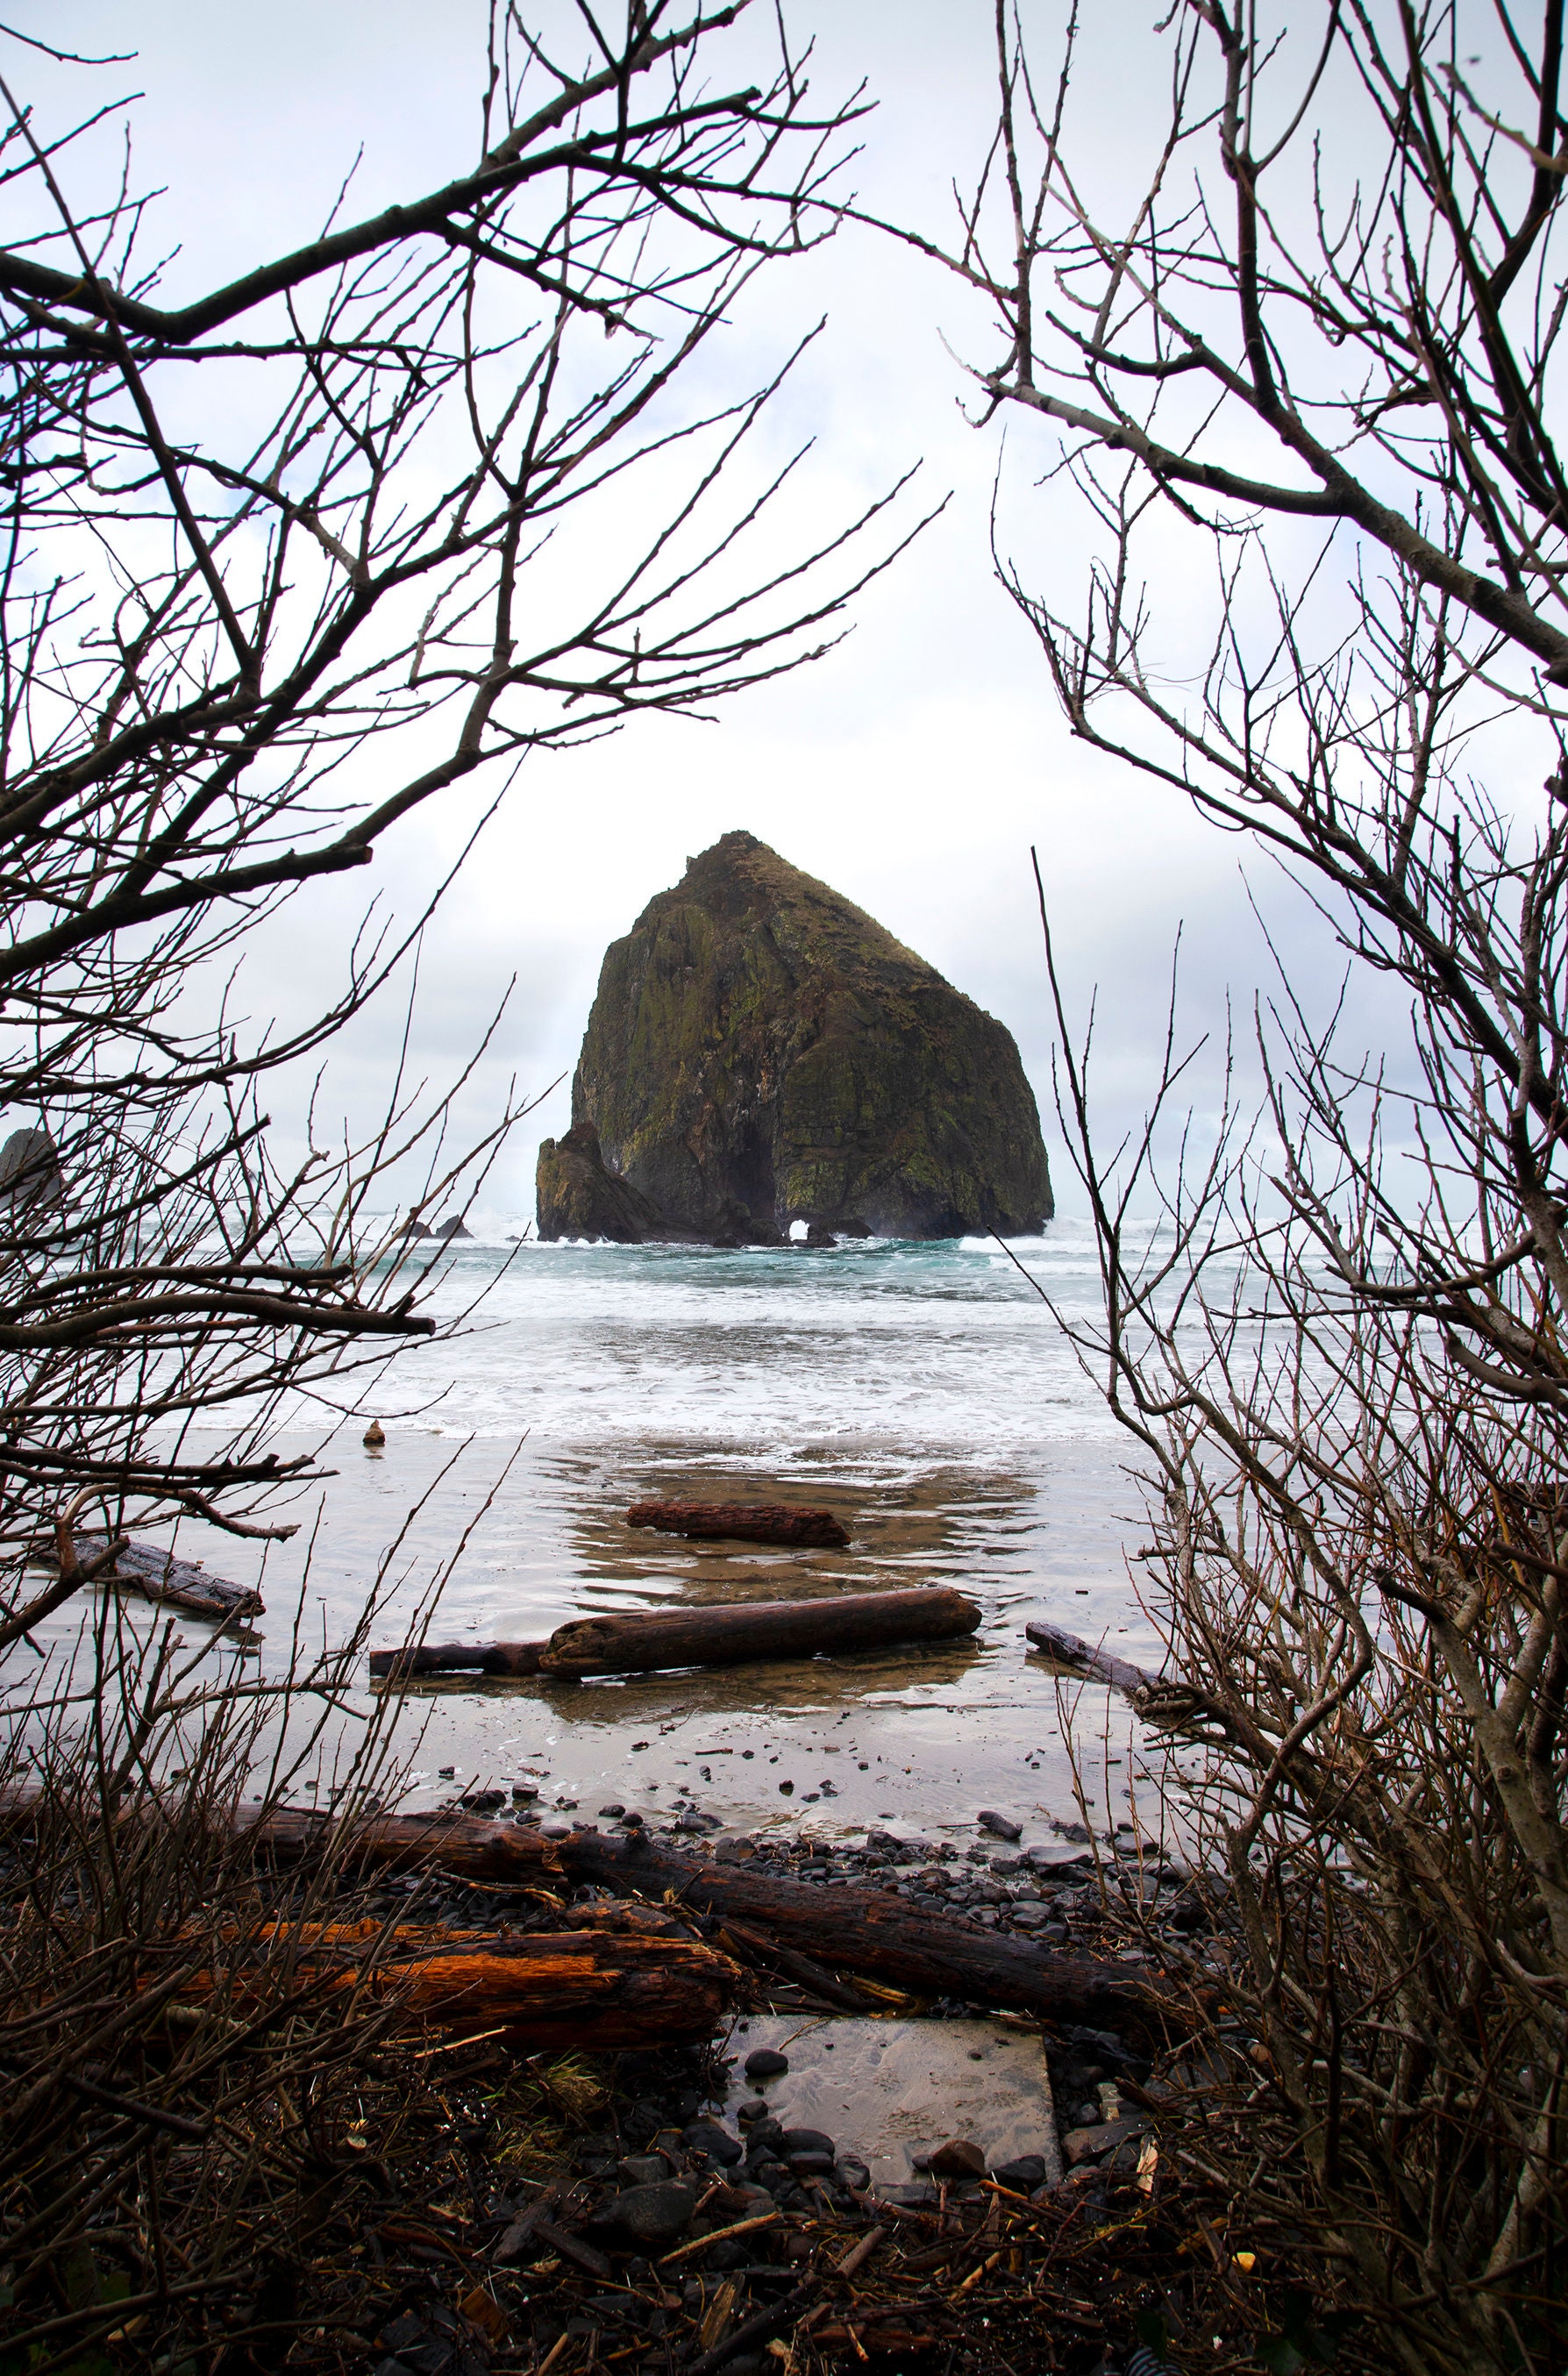 Haystack Rock at Cannon Beach | Paint-by-Number Kits for Adults — Elle Crée  (she creates)